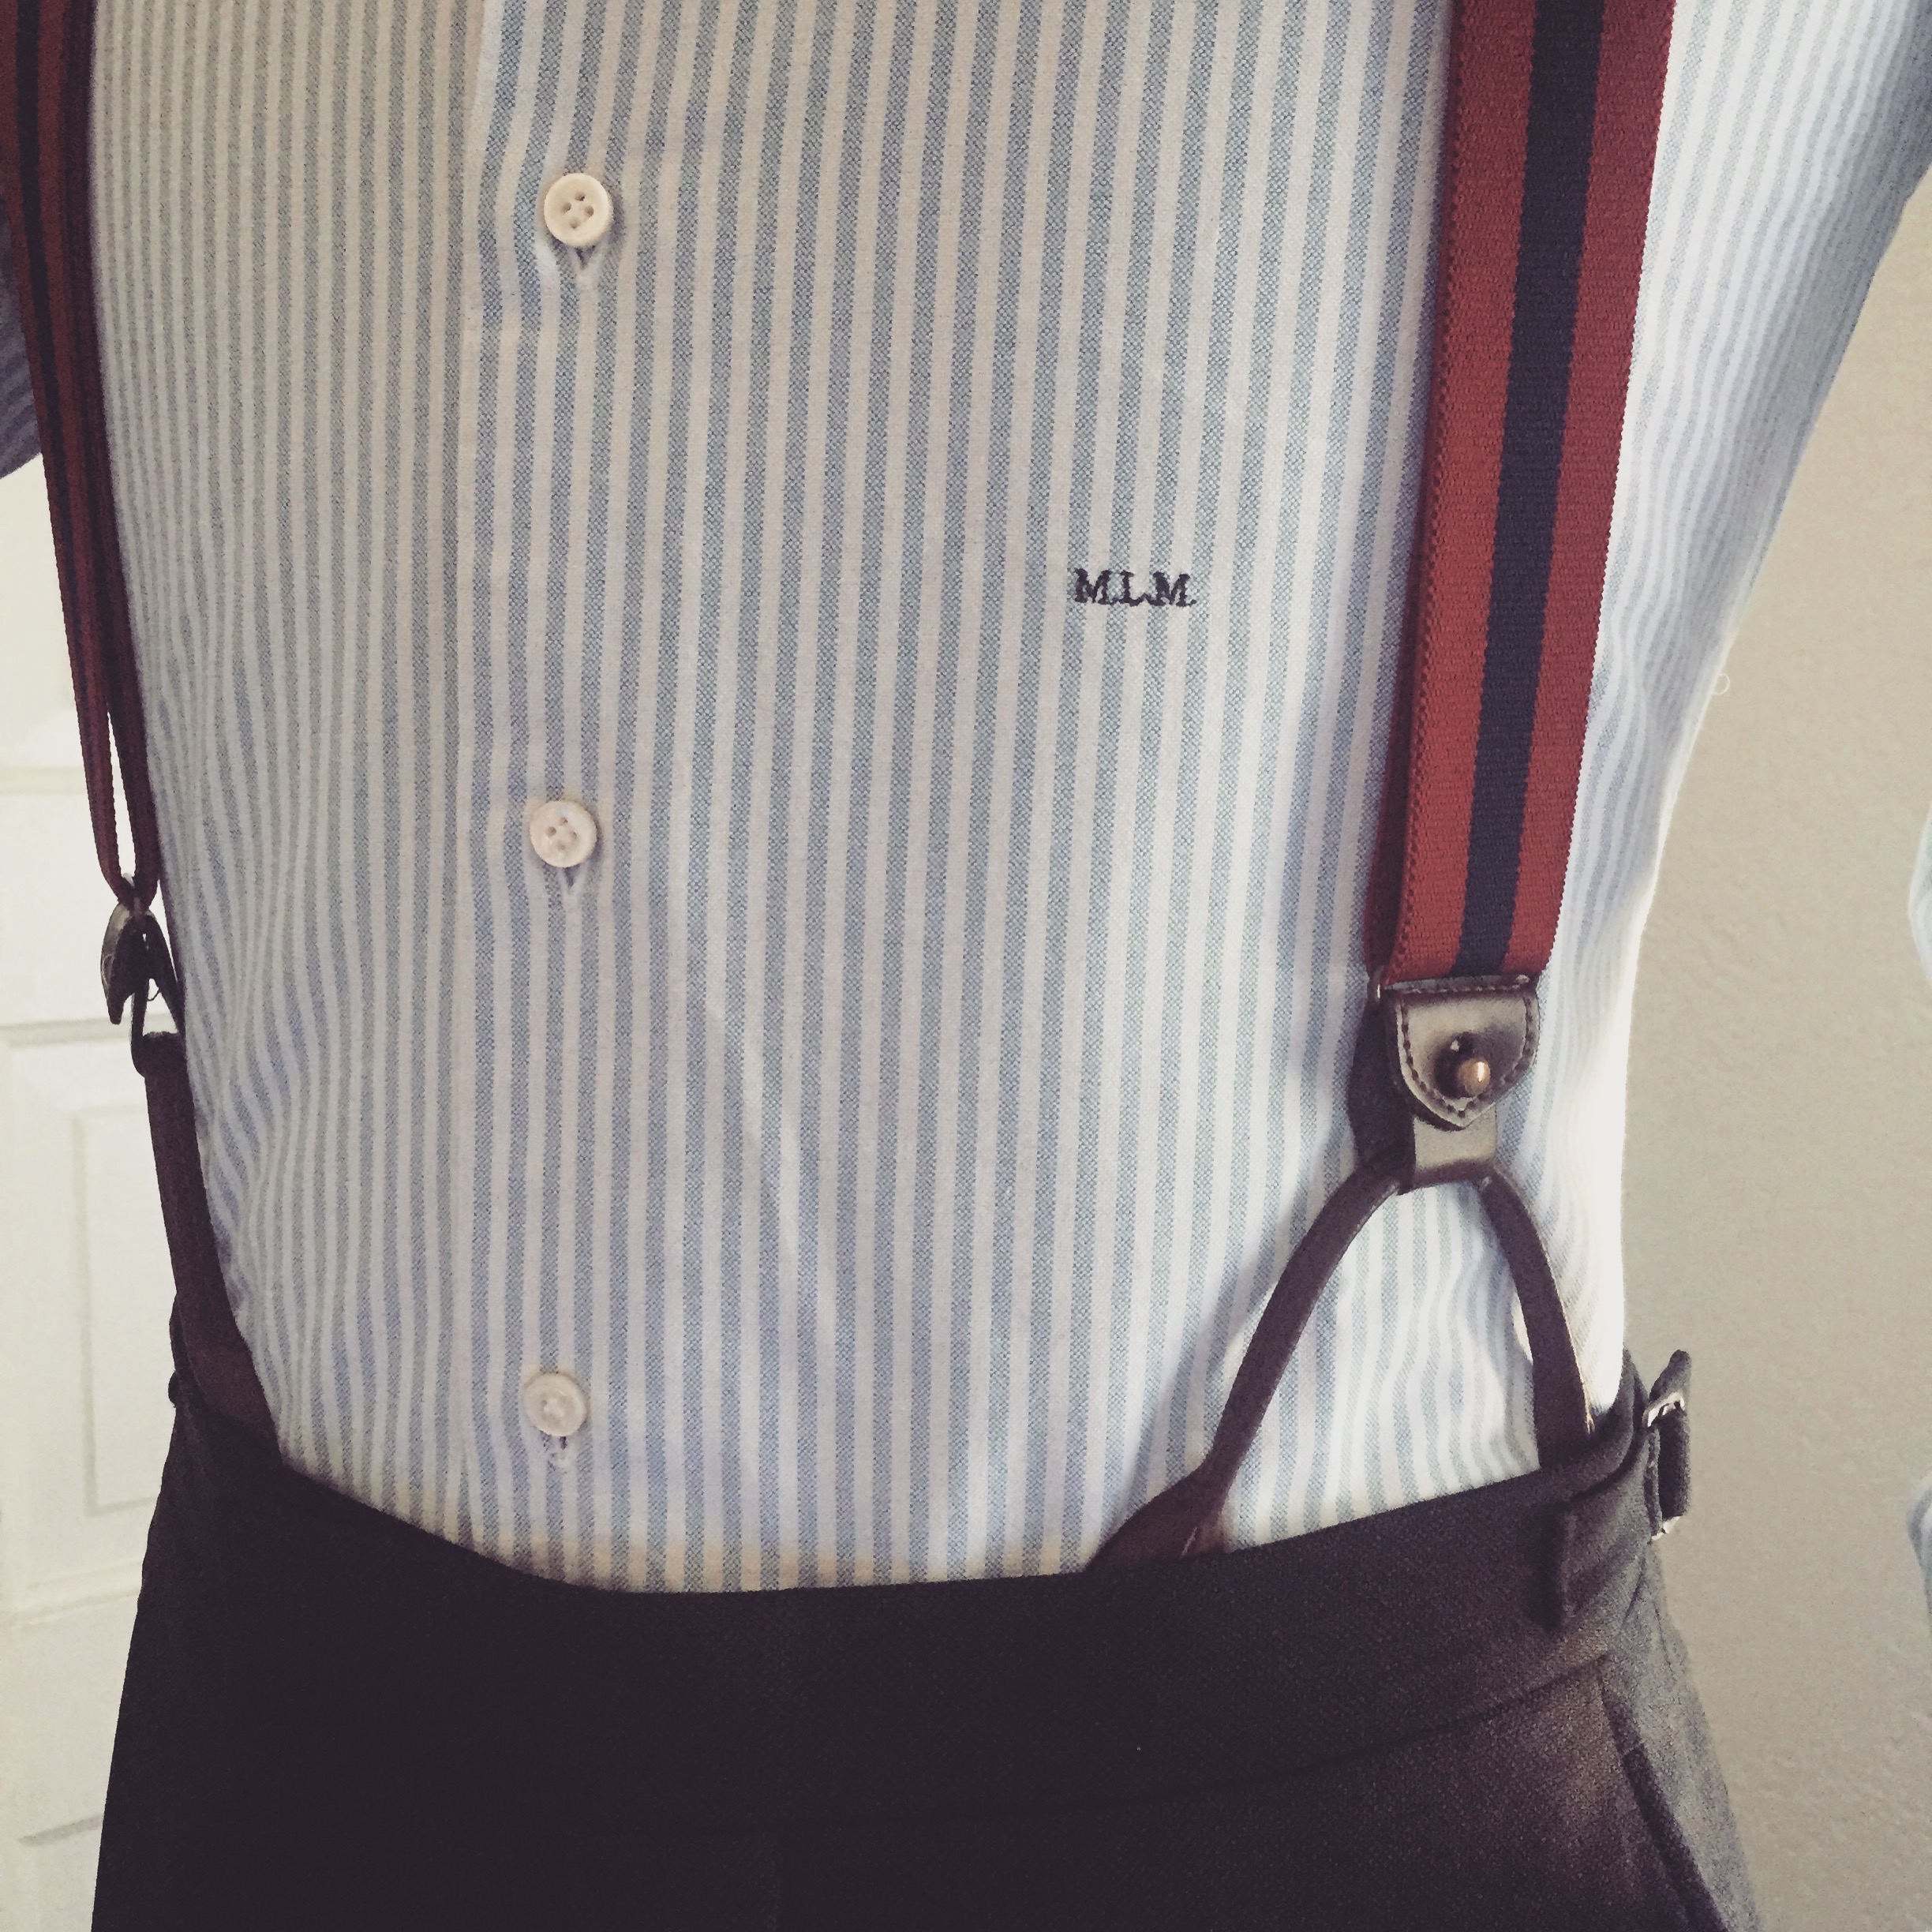 Get your suspenders right — Manlygents